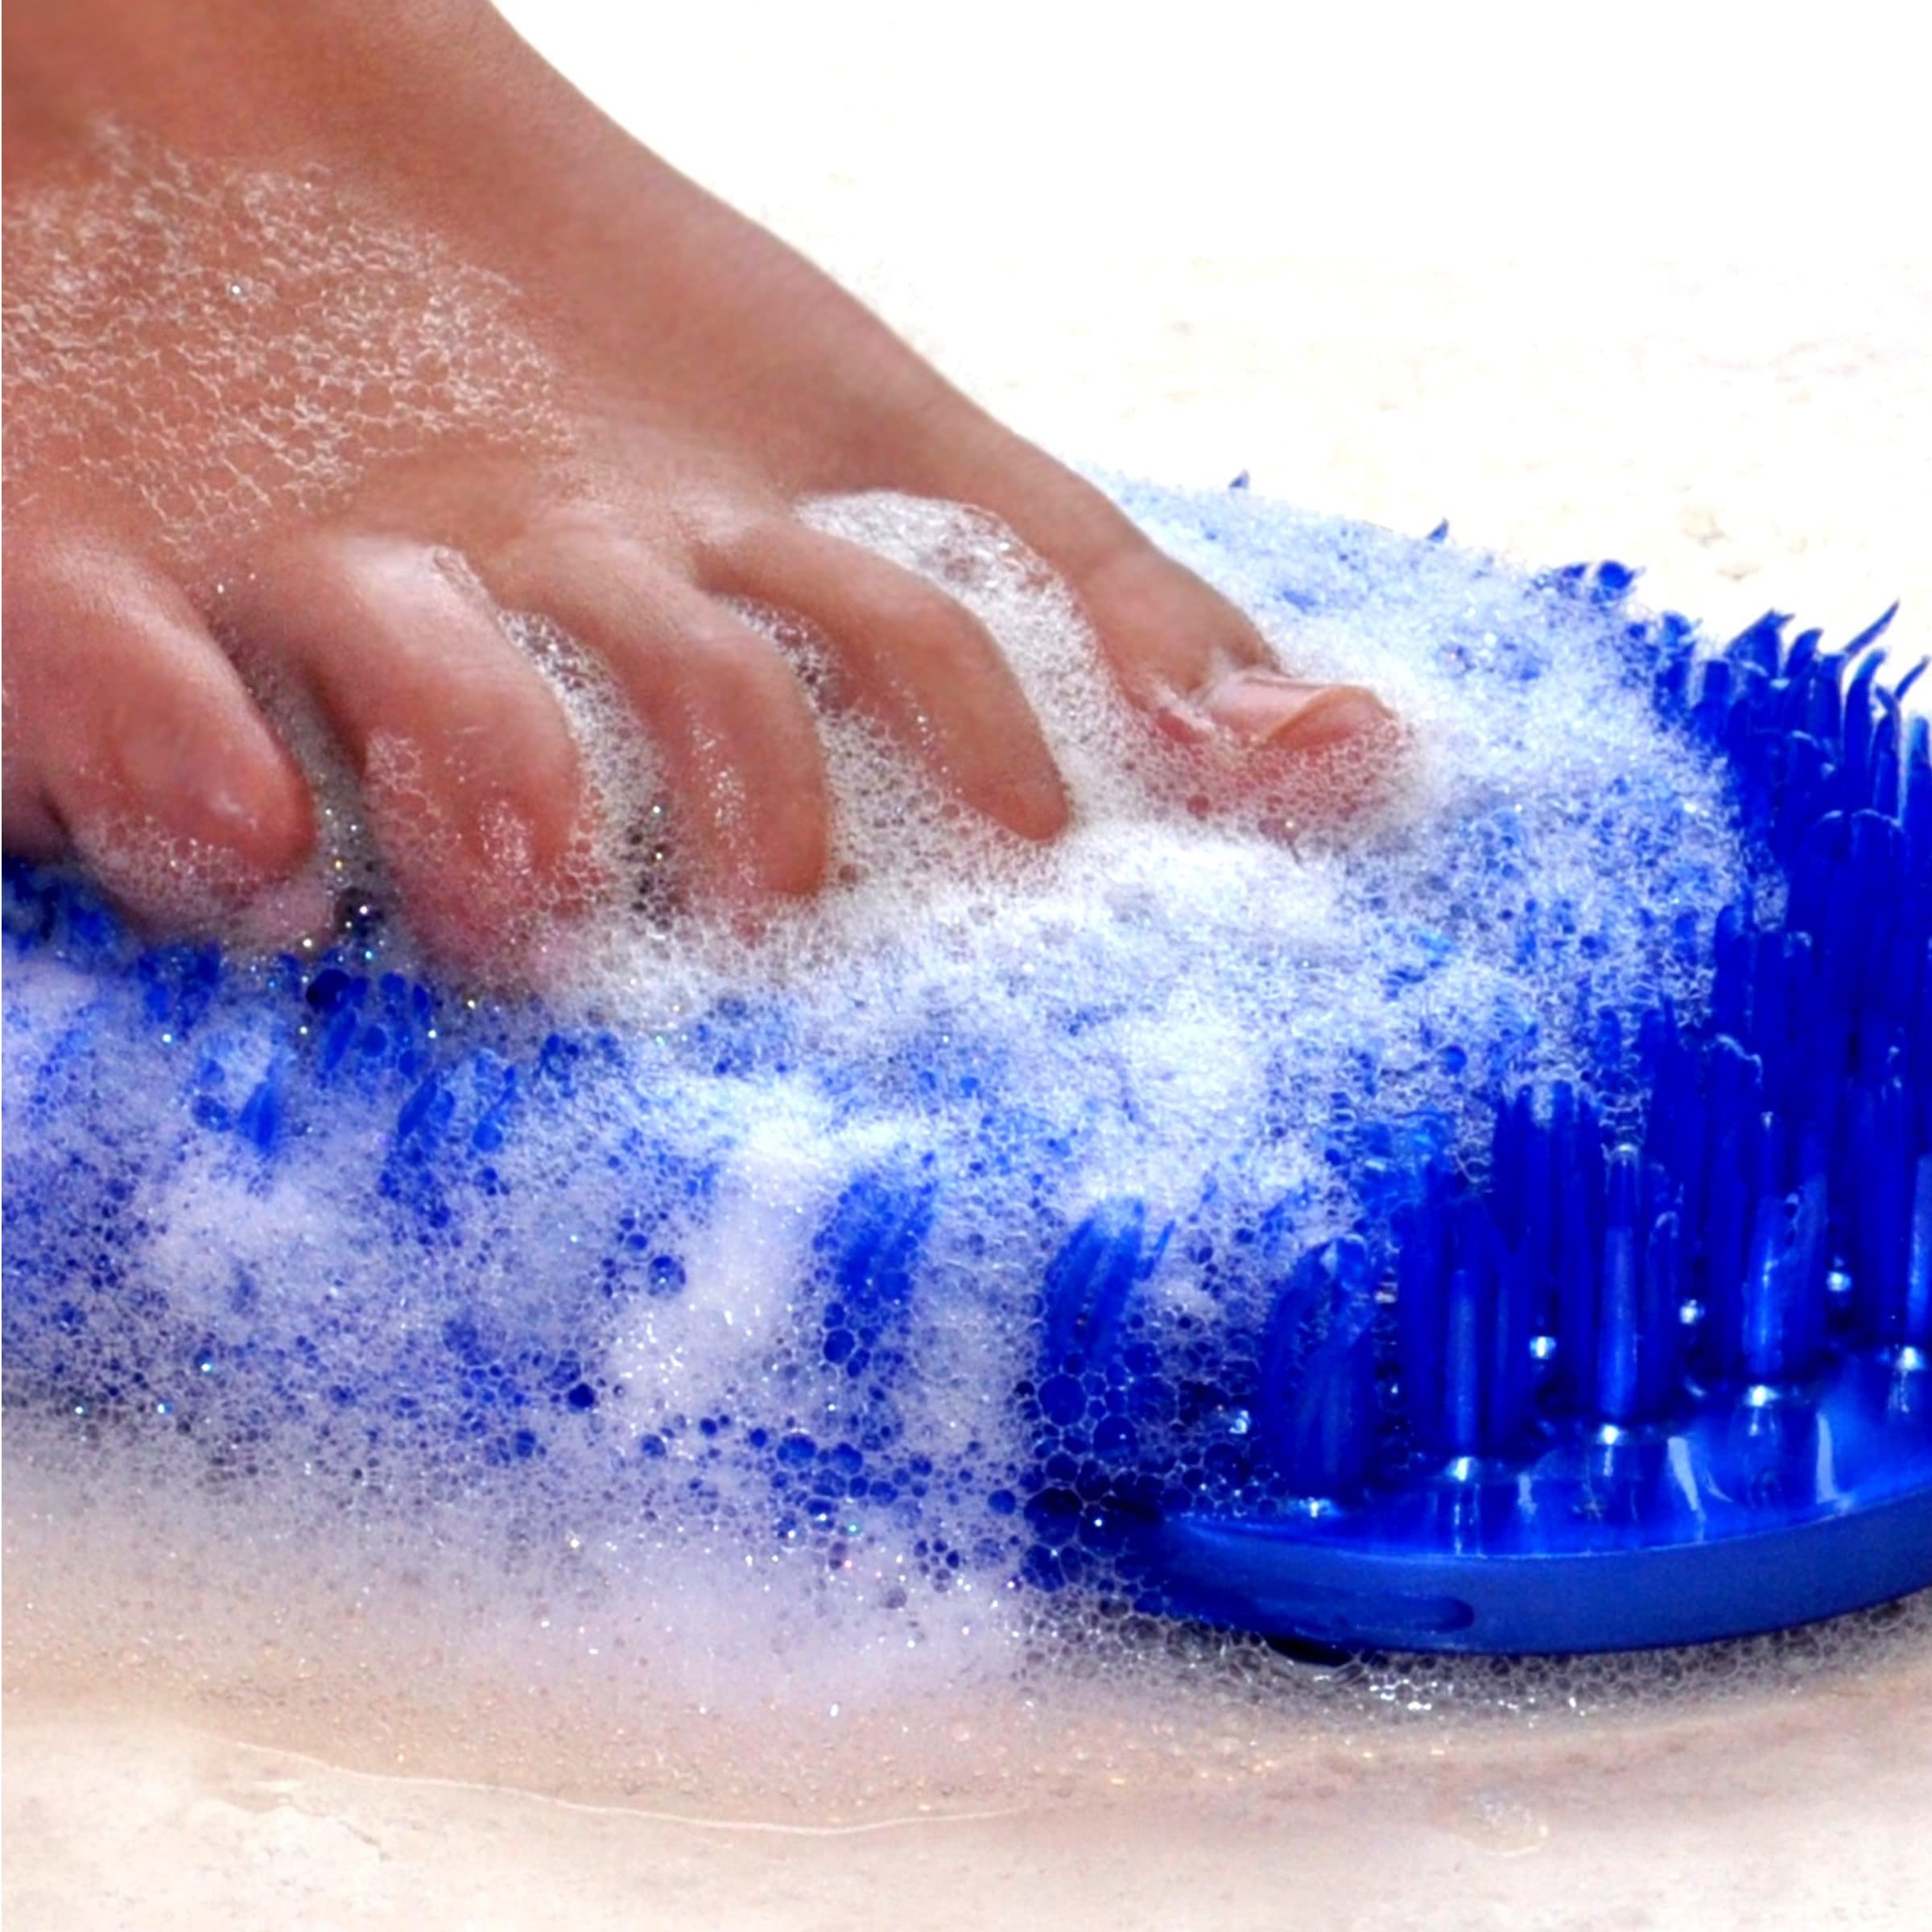 Soapy Soles Foot Scrubbing Pad & Massager, Pearl Blue